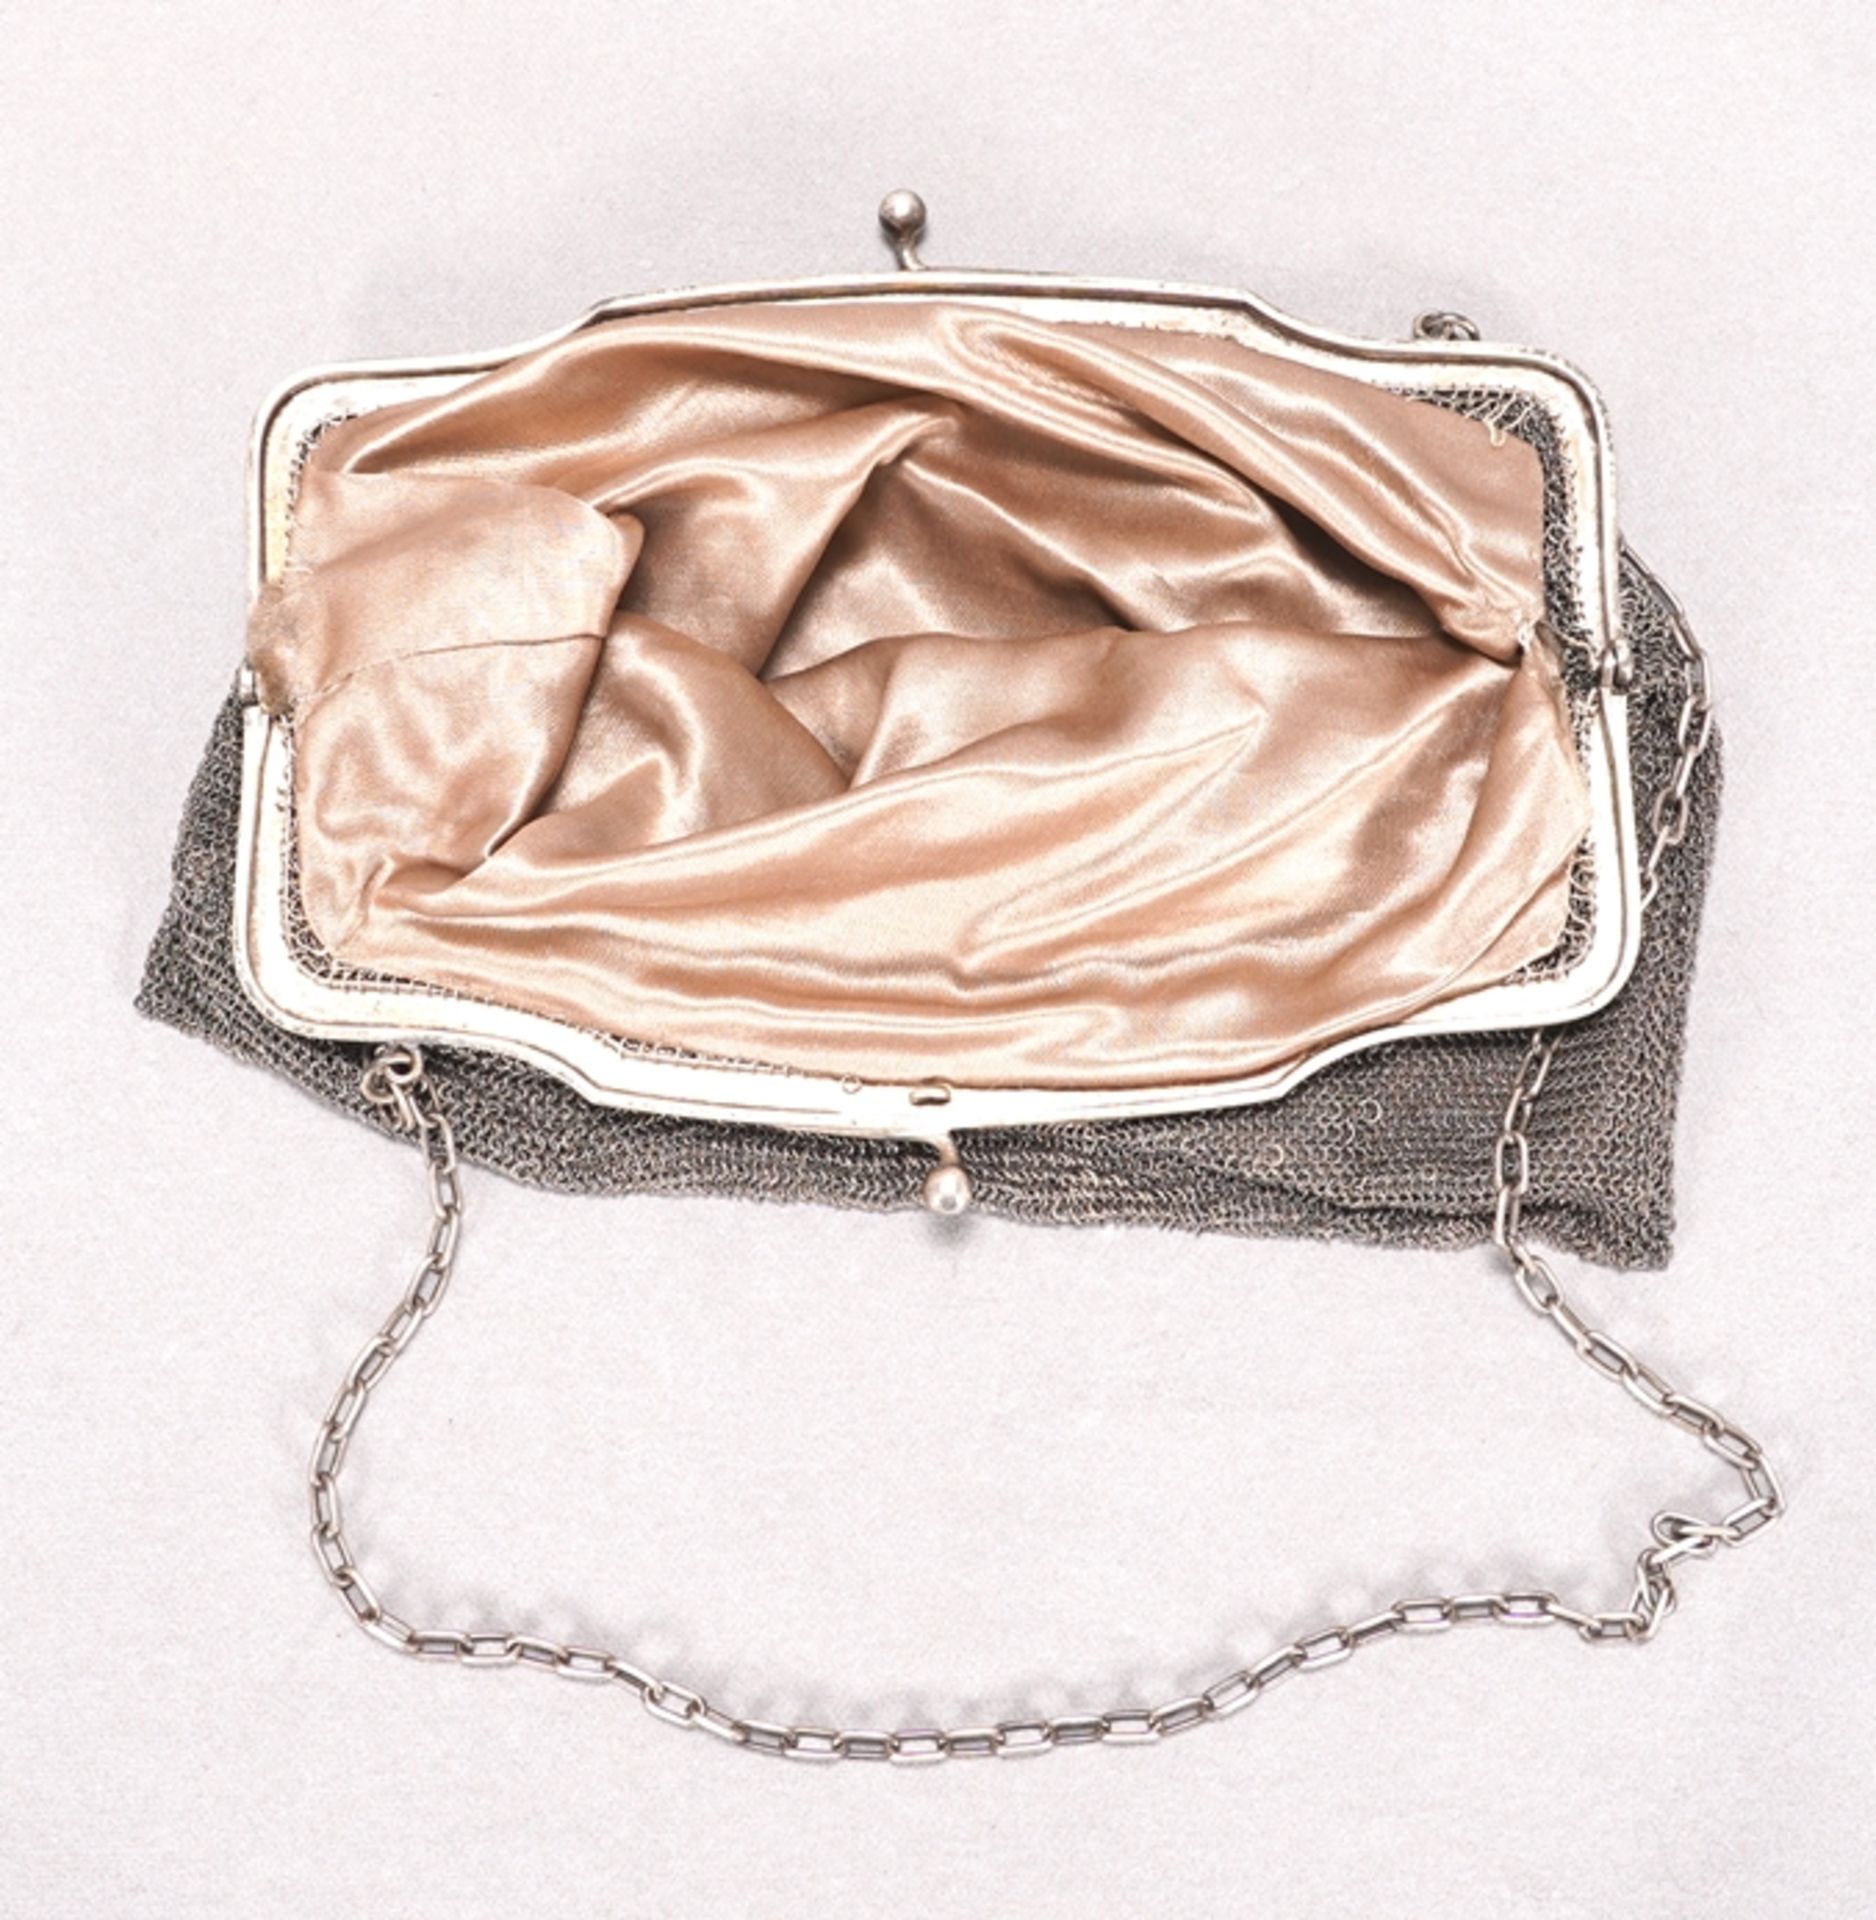 Silver bag - Image 2 of 3